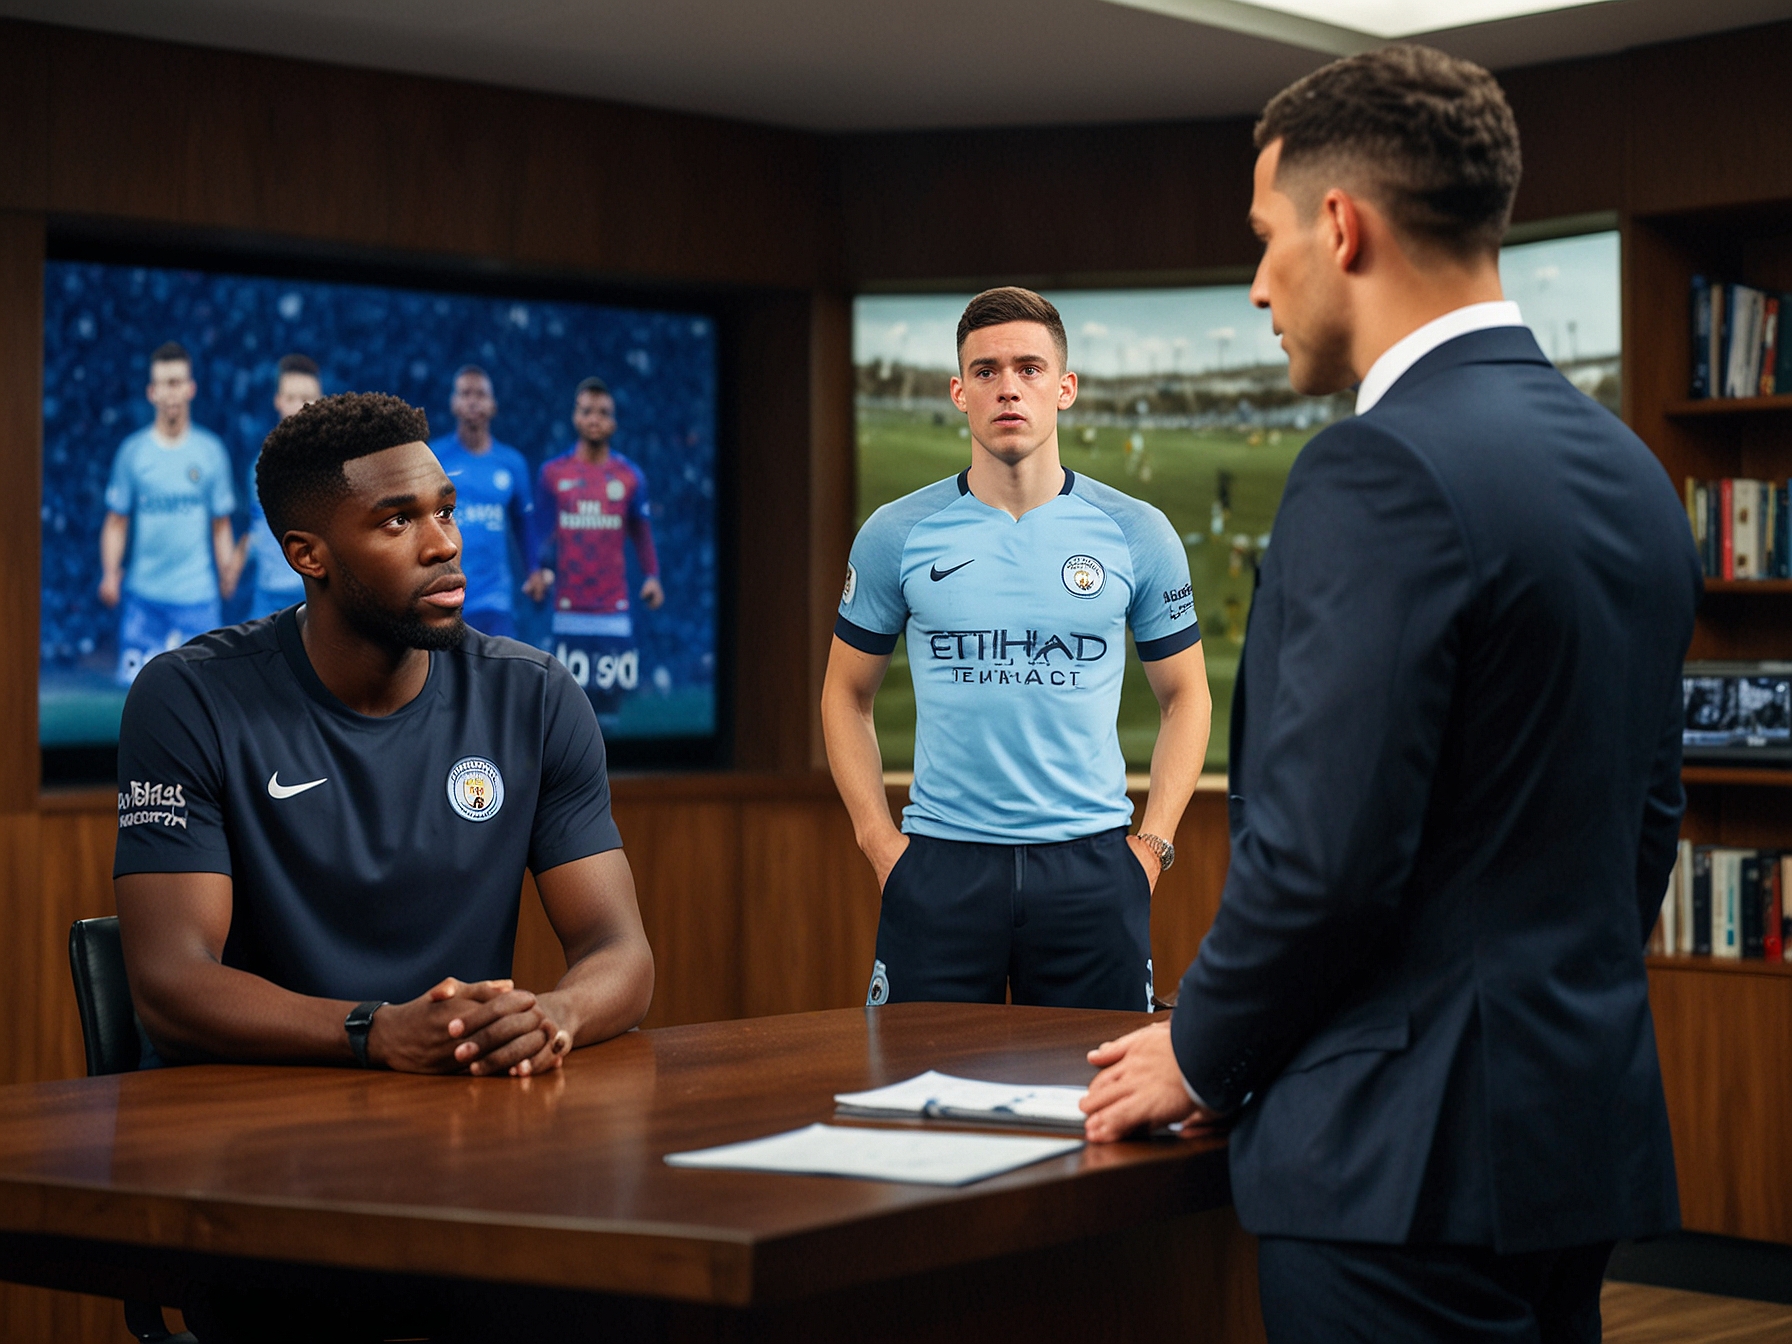 Micah Richards passionately argues on live TV, highlighting Phil Foden's impactfulness at Manchester City, while Rio Ferdinand listens intently, setting the stage for their heated debate.